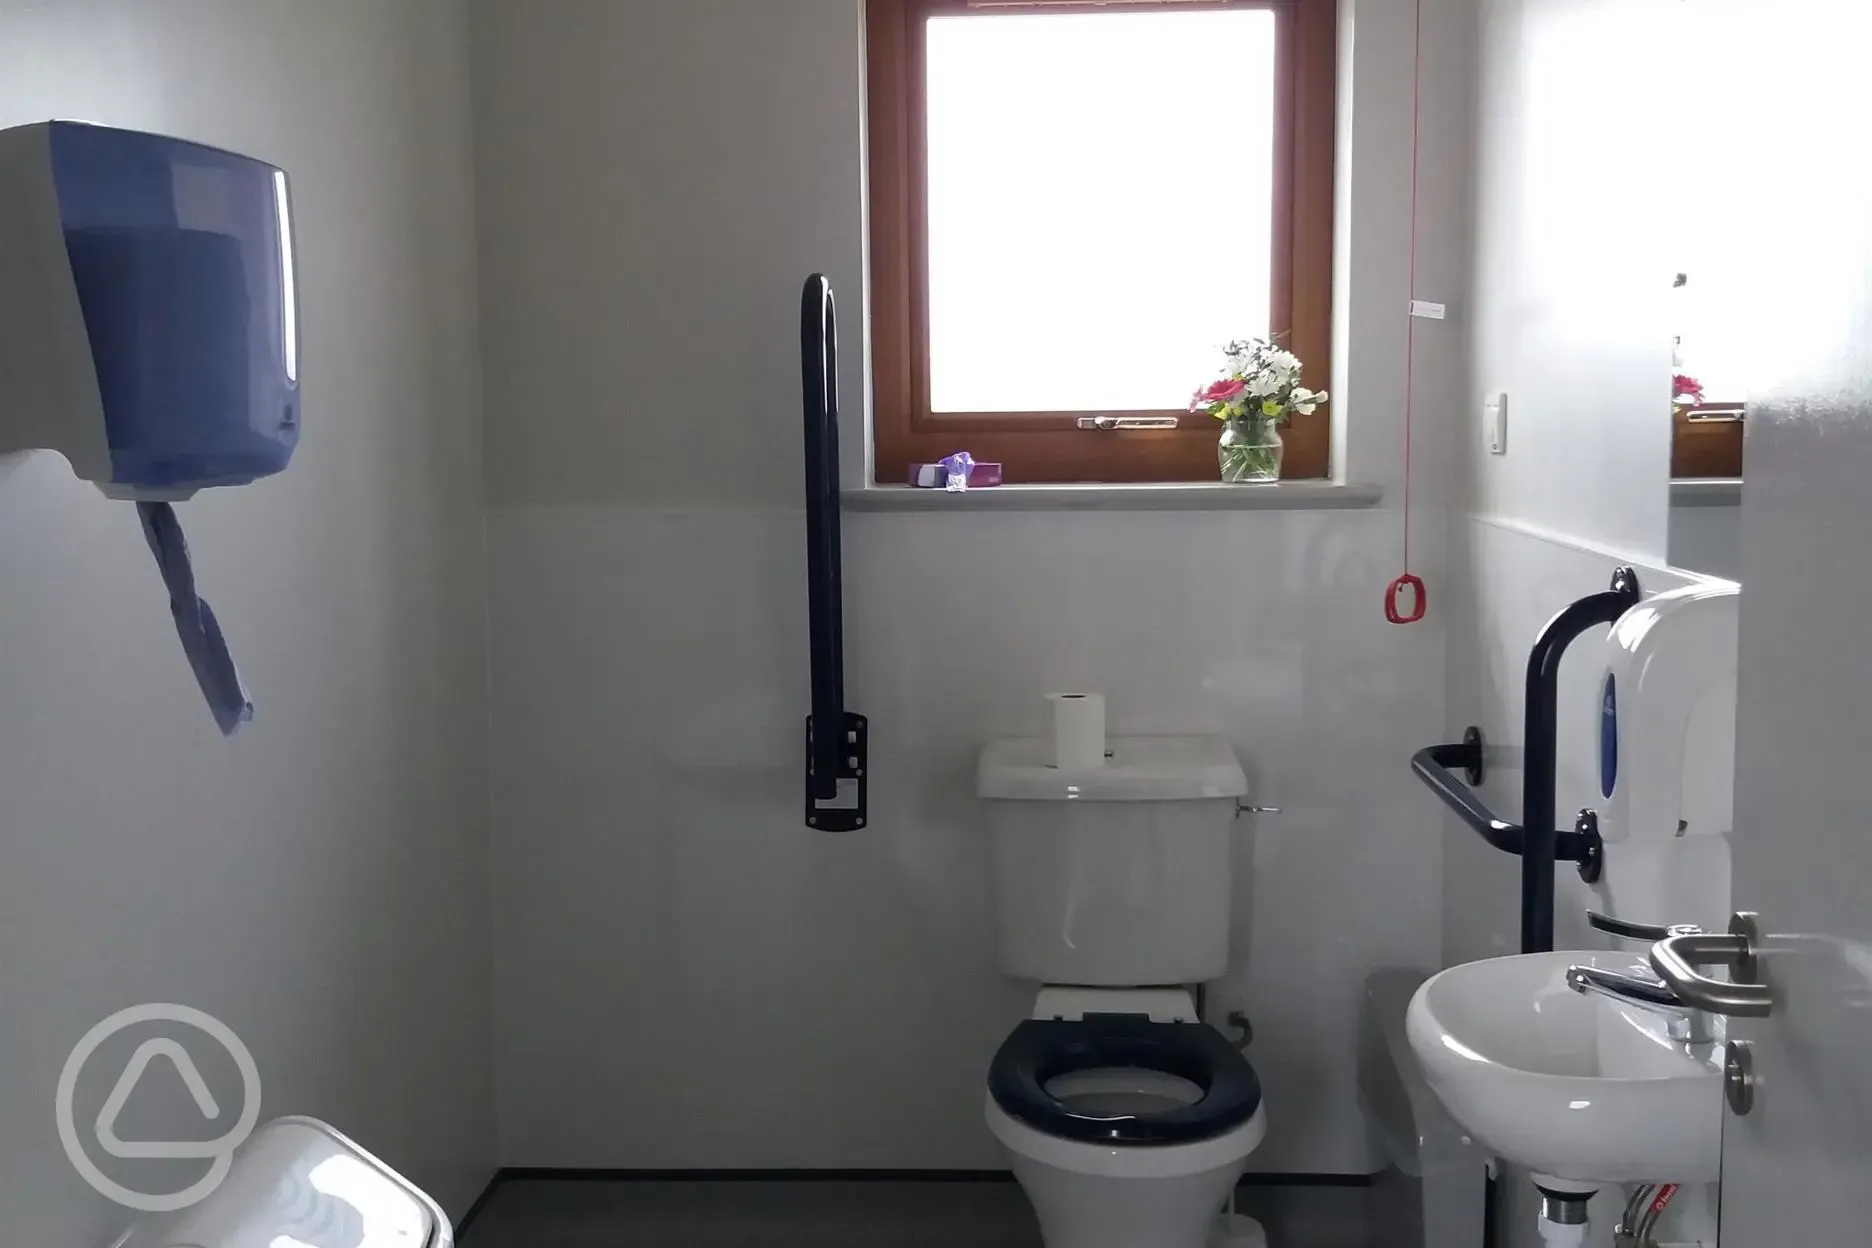 Disabled Toilet 